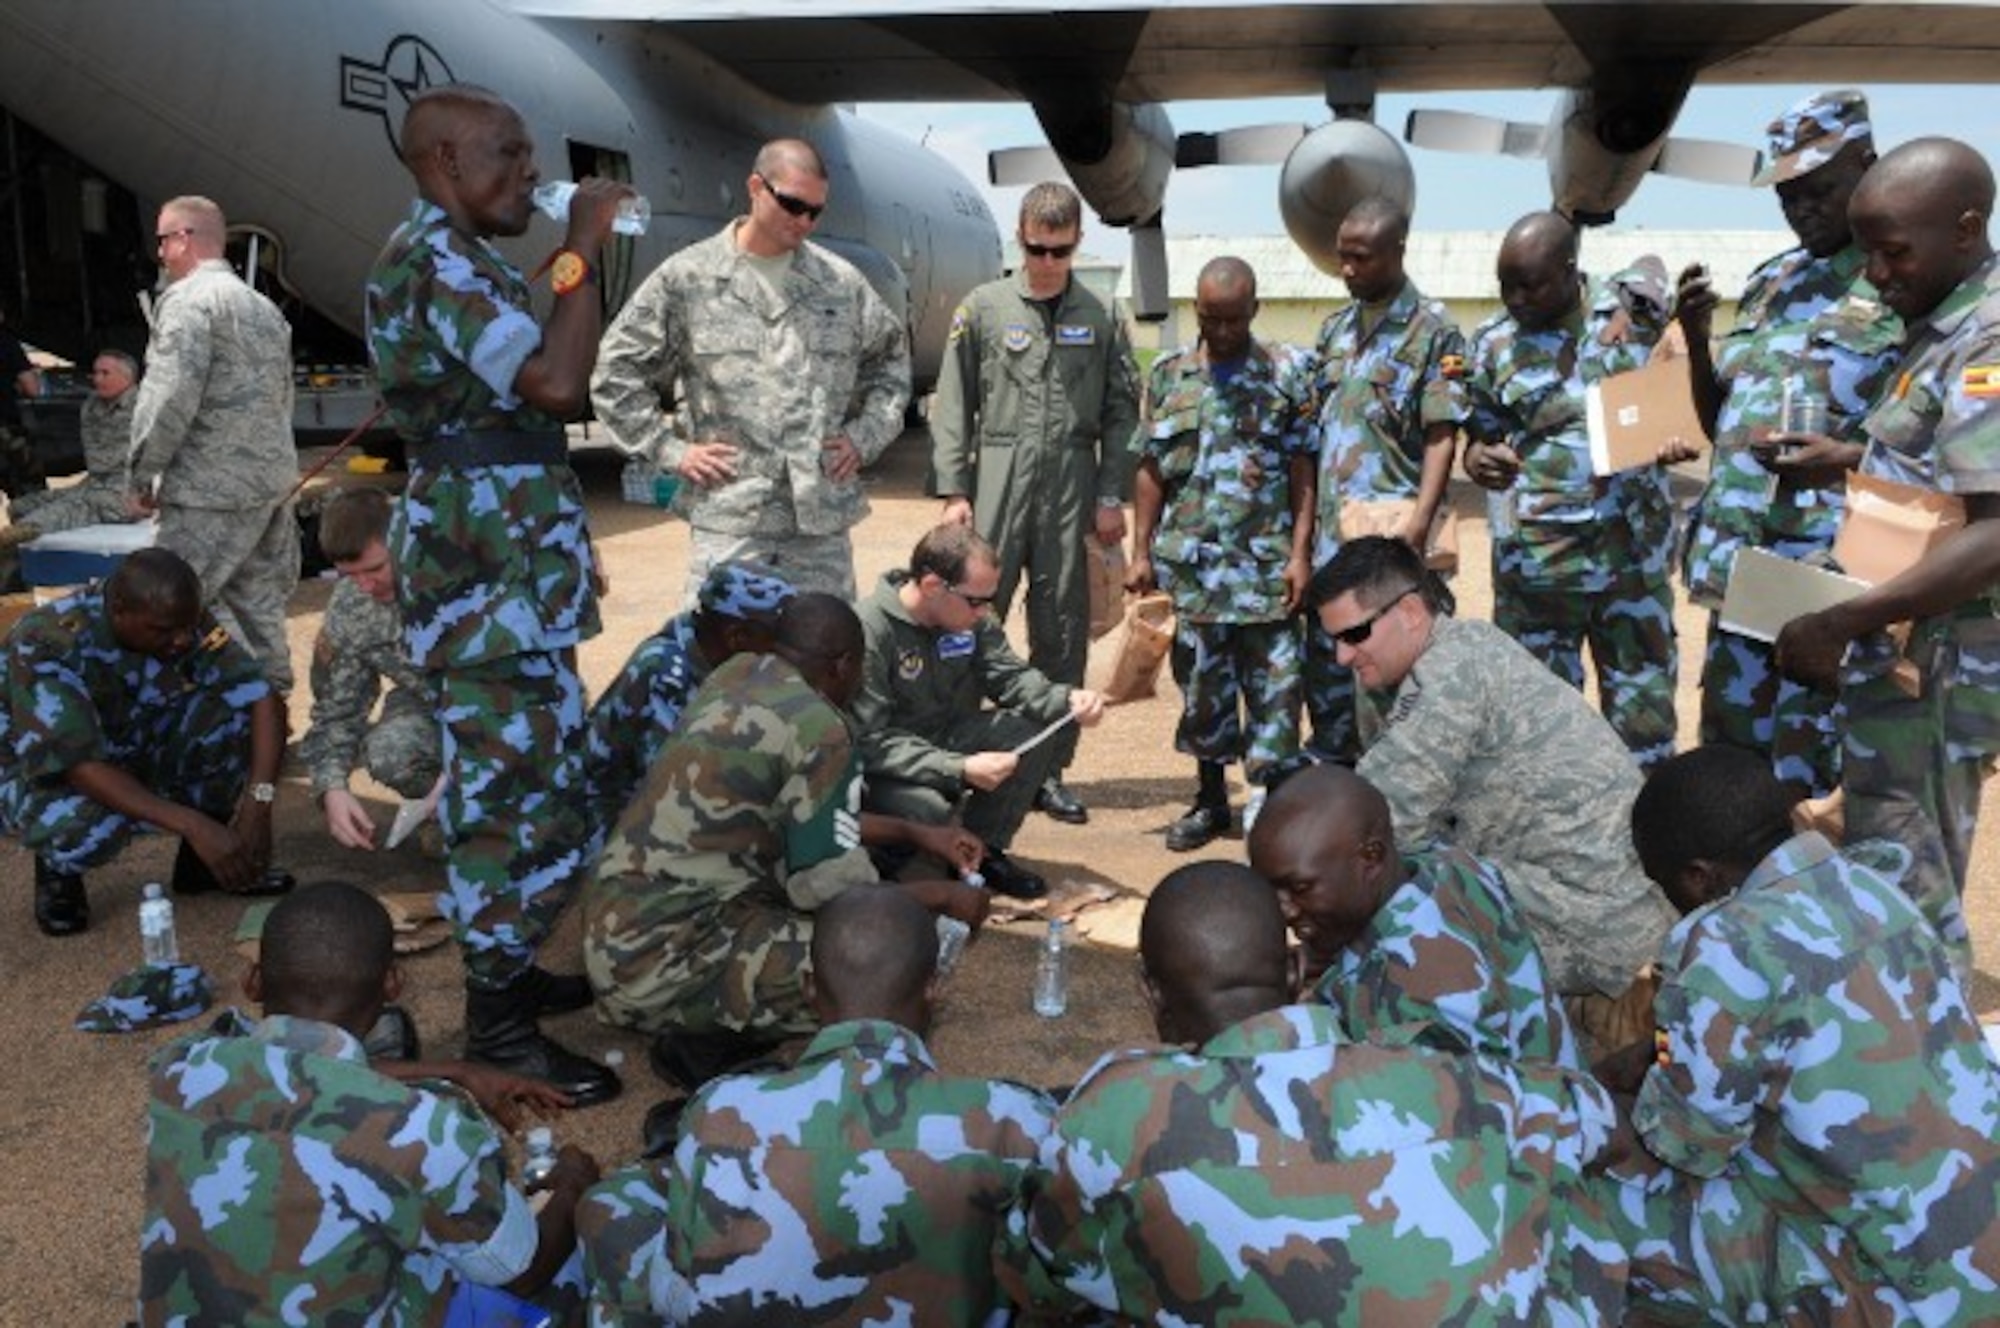 SSgt. Josh Woolridge,37th Airlift Squadron loadmaster, and MSgt. Garrick Lewis, drop zone support lead for 17th Air Force, explain how to "cook" meals-ready-to-eat to members of the Ugandan Peoples Defense Forces during a TSC event Aug. 26. (U.S. Air Force photo by Maj. Paula Kurtz.)